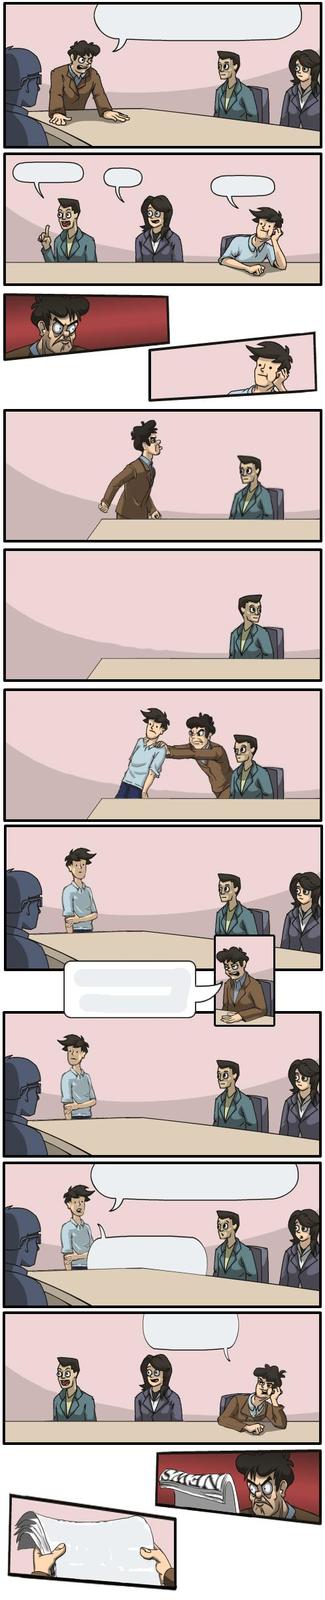 High Quality Boardroom Meeting Suggestion Extended Version Blank Meme Template